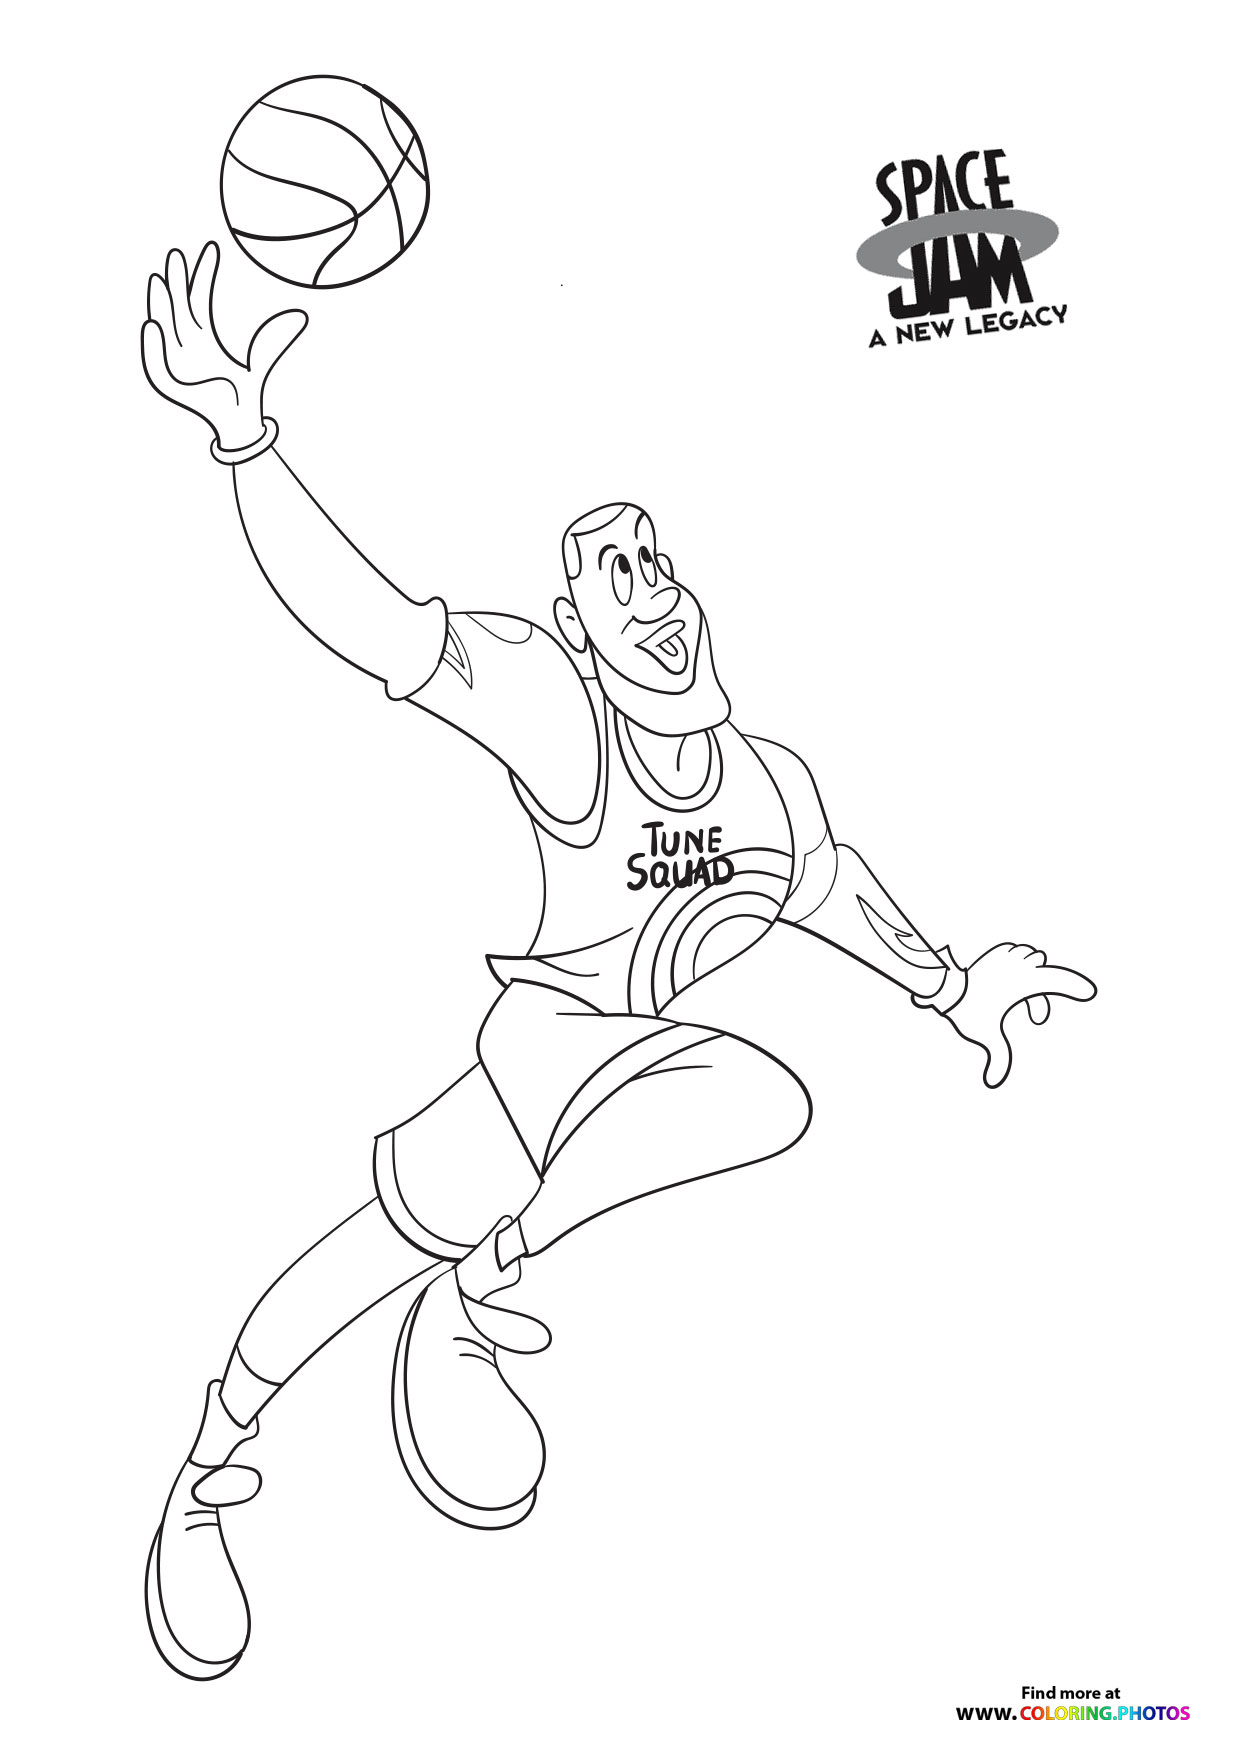 LeBron James dunking - Space Jam: A new legacy - Coloring Pages for kids